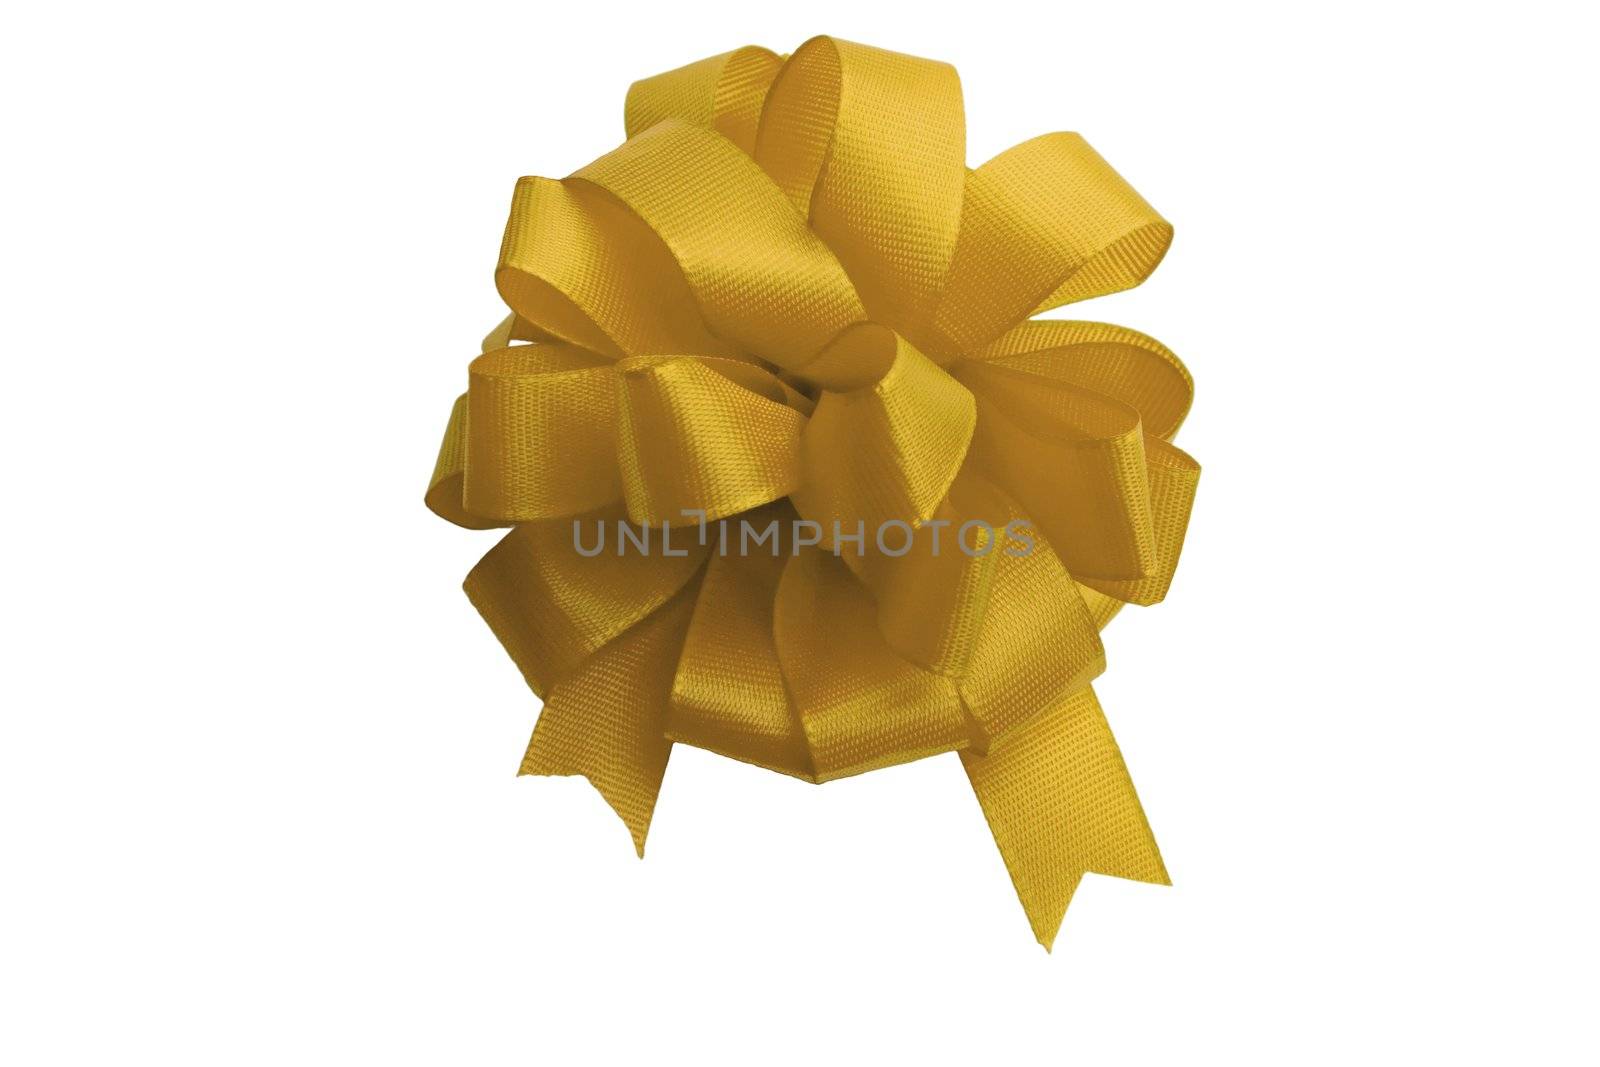 Gold bow to be used in placing on top of items - gifts, products, etc.